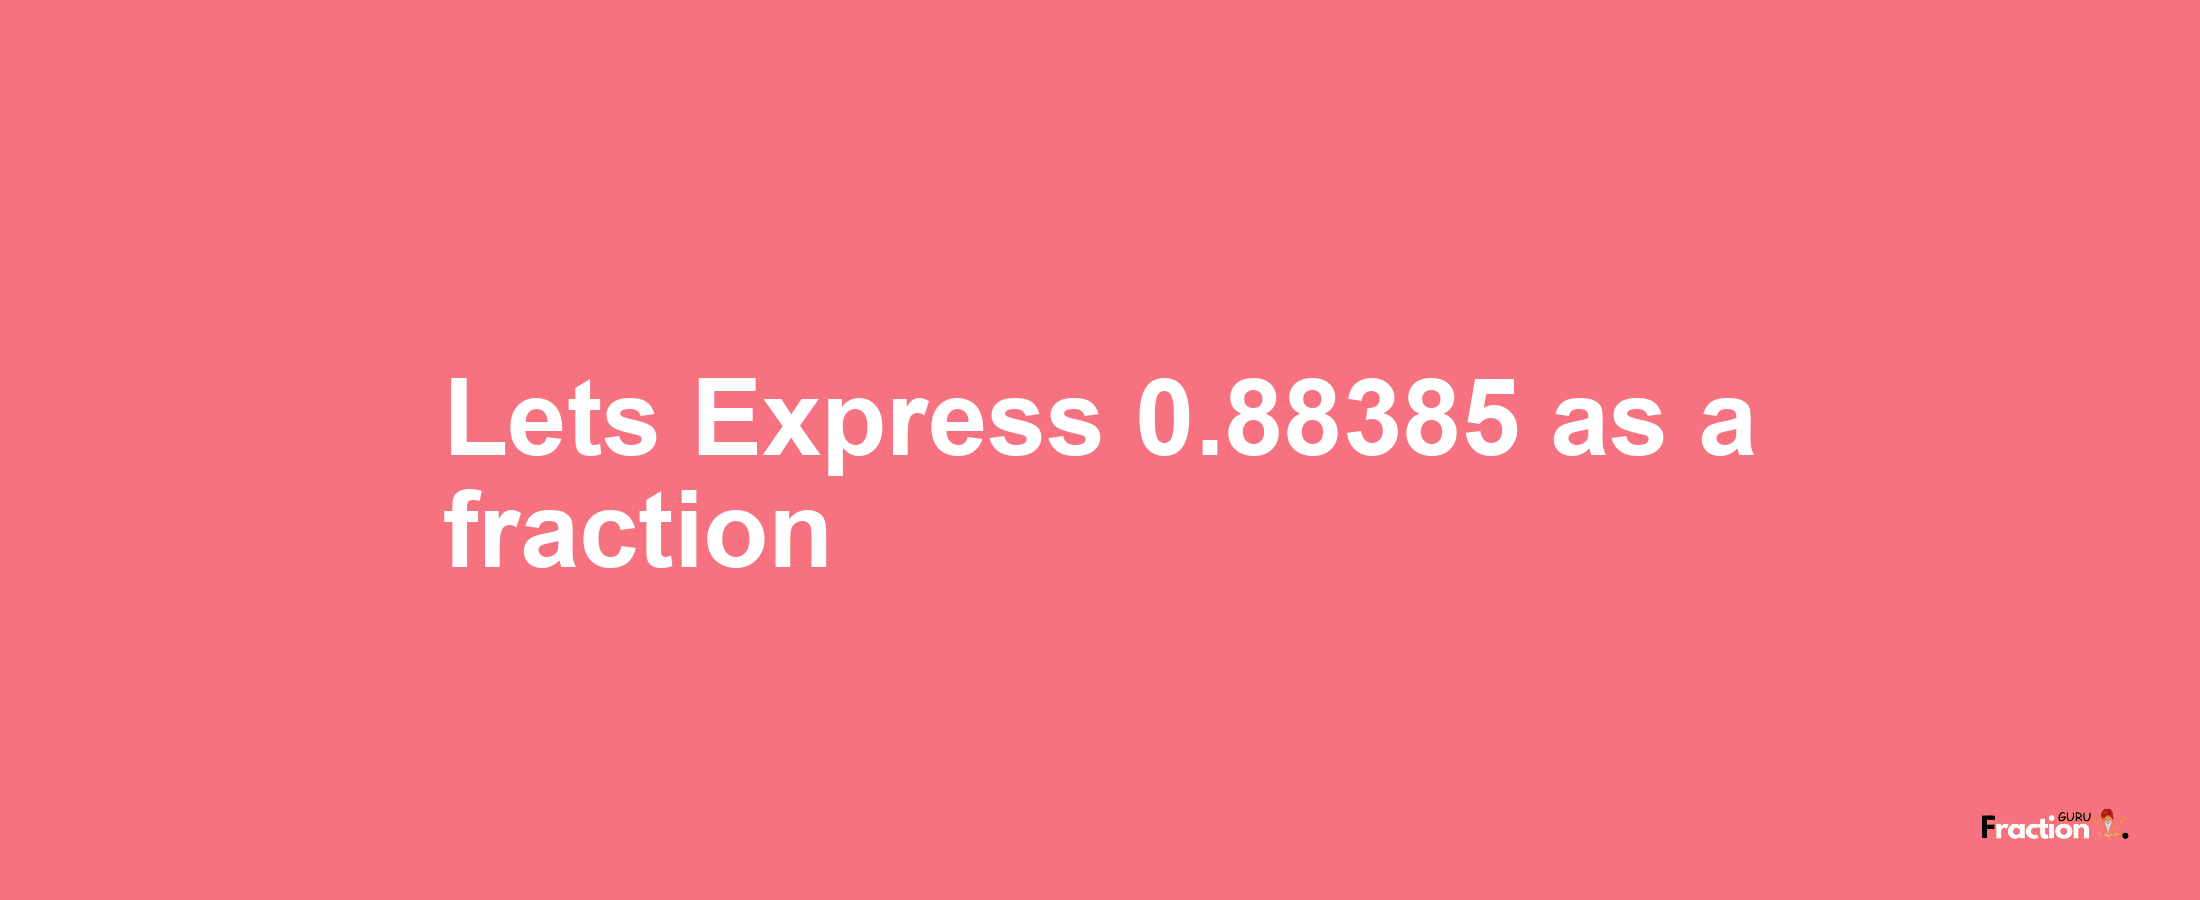 Lets Express 0.88385 as afraction